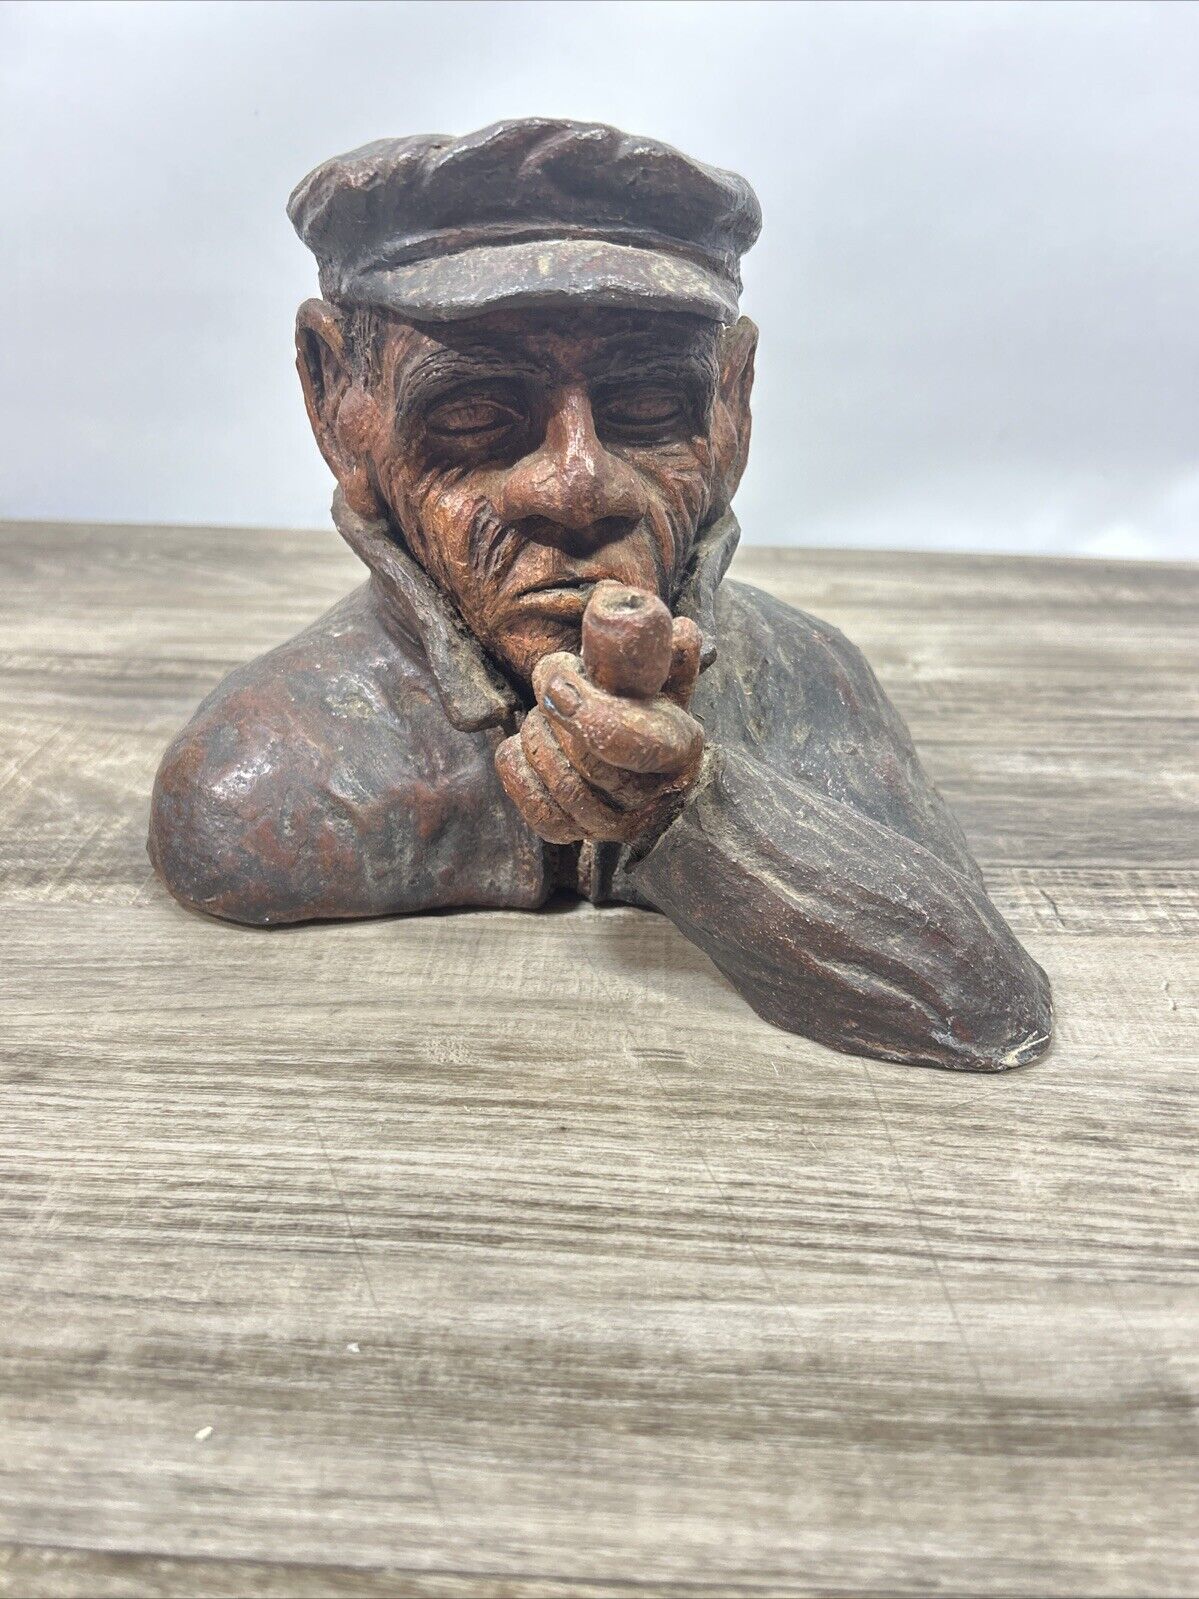 Vintage Ceramic Old Man Sailor Bust - Fisherman with Pipe - Maritime Clay Art